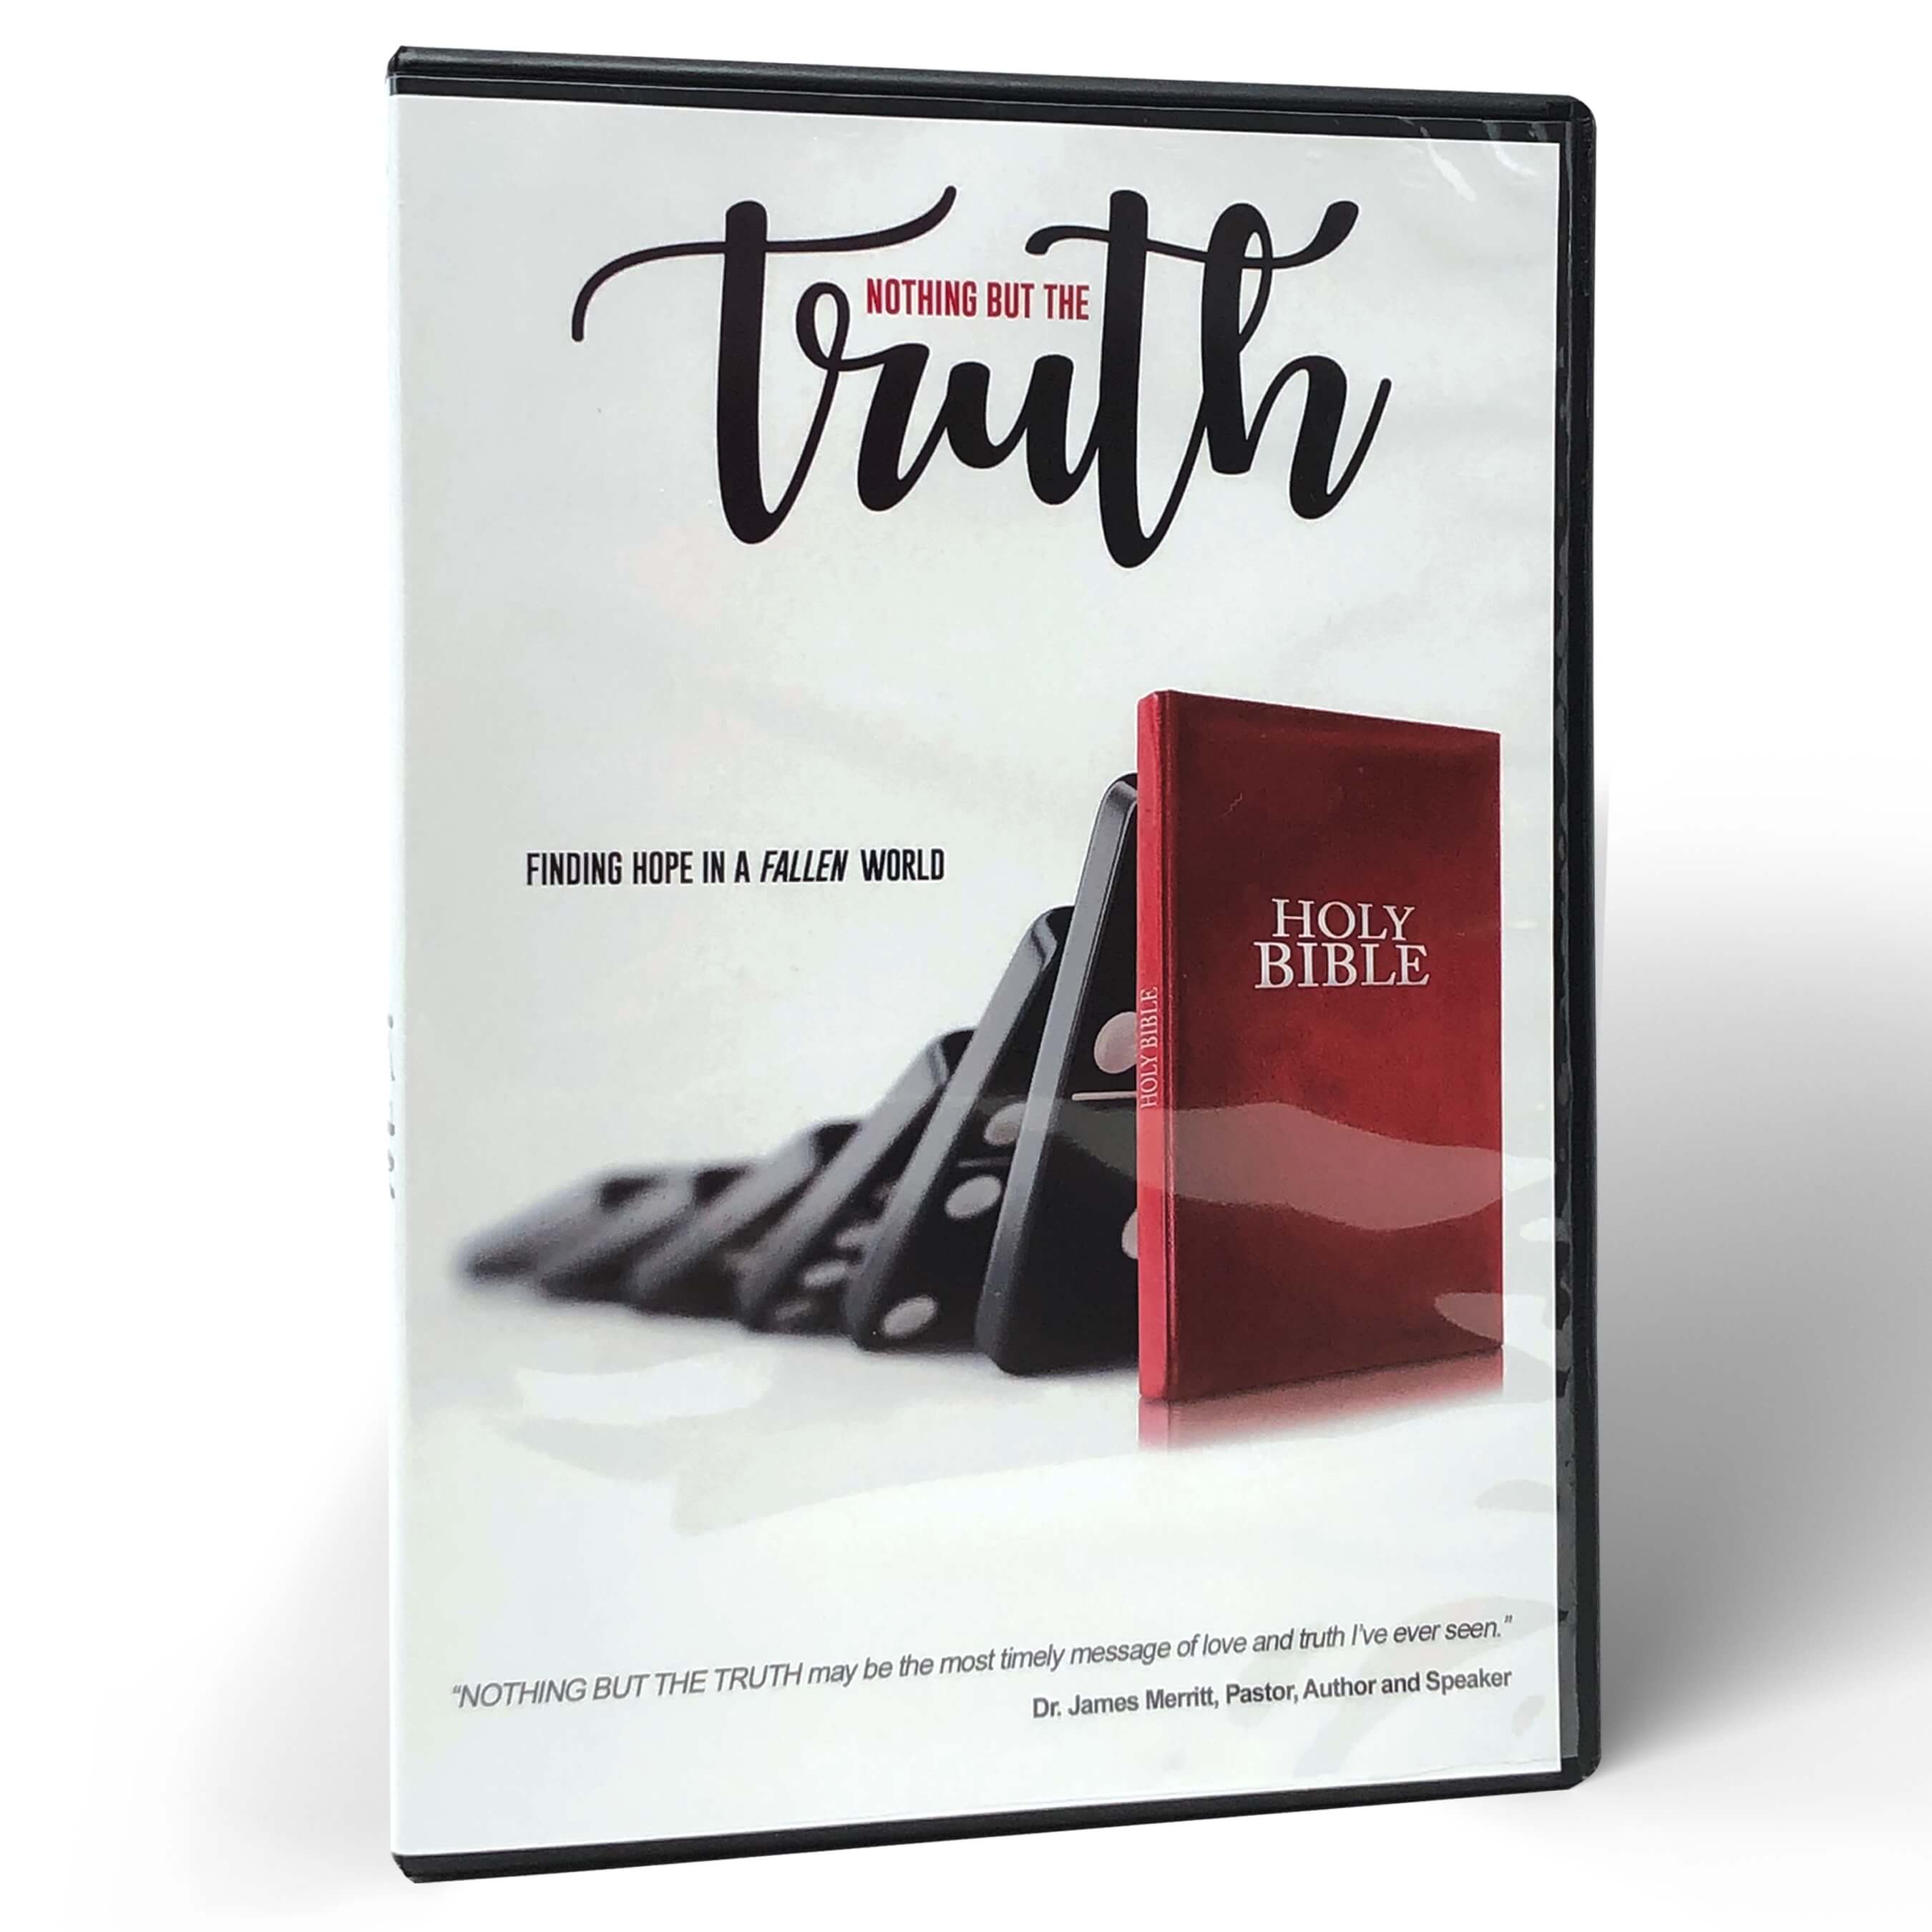 NOTHING BUT THE TRUTH RETAIL DVD—CURRENTLY UNAVAILABLE